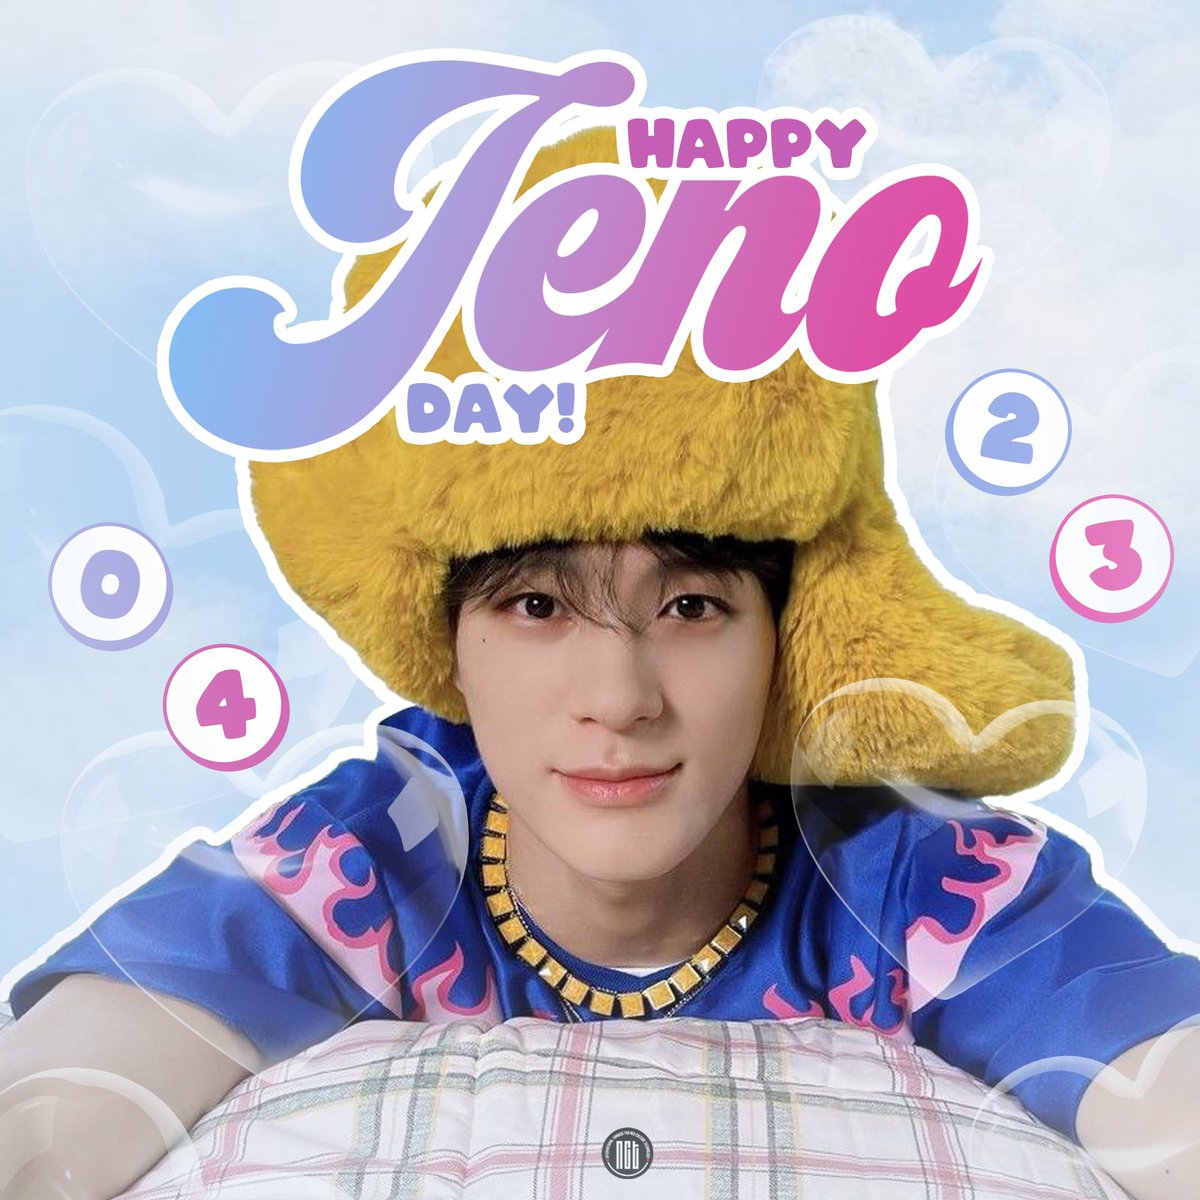 [!!!] #HAPPYJENODAY from SM_NCT! 🎂 #AcePrinceJENODay 💚 #제노생일축하해_사랑행_후헹헹 💚 Poster by @fvllsunns 🌱 @NCTsmtown @NCTsmtown_DREAM